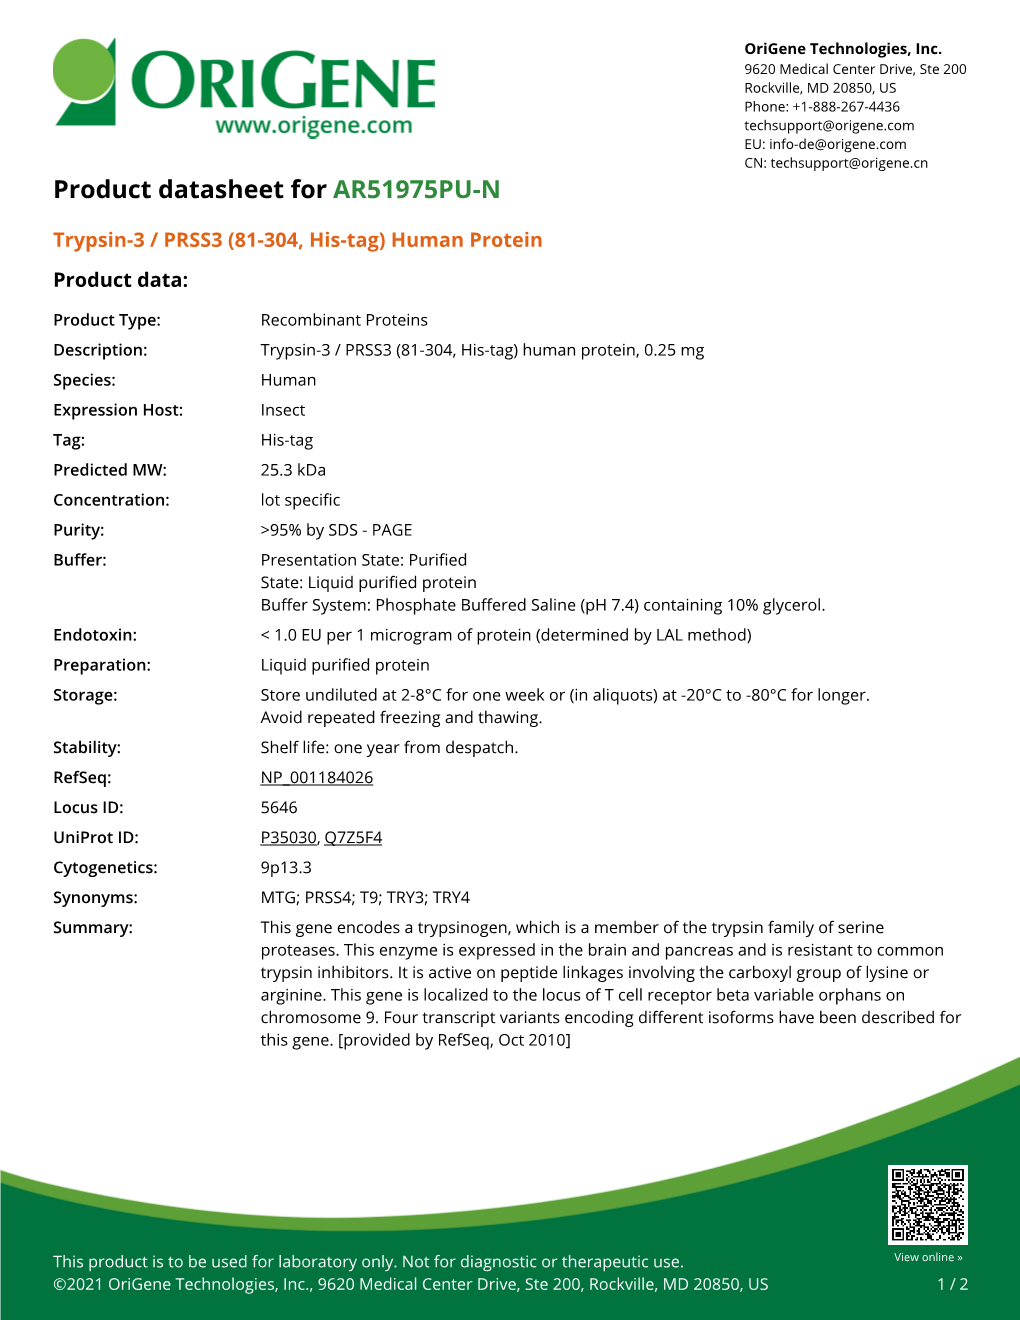 Trypsin-3 / PRSS3 (81-304, His-Tag) Human Protein Product Data